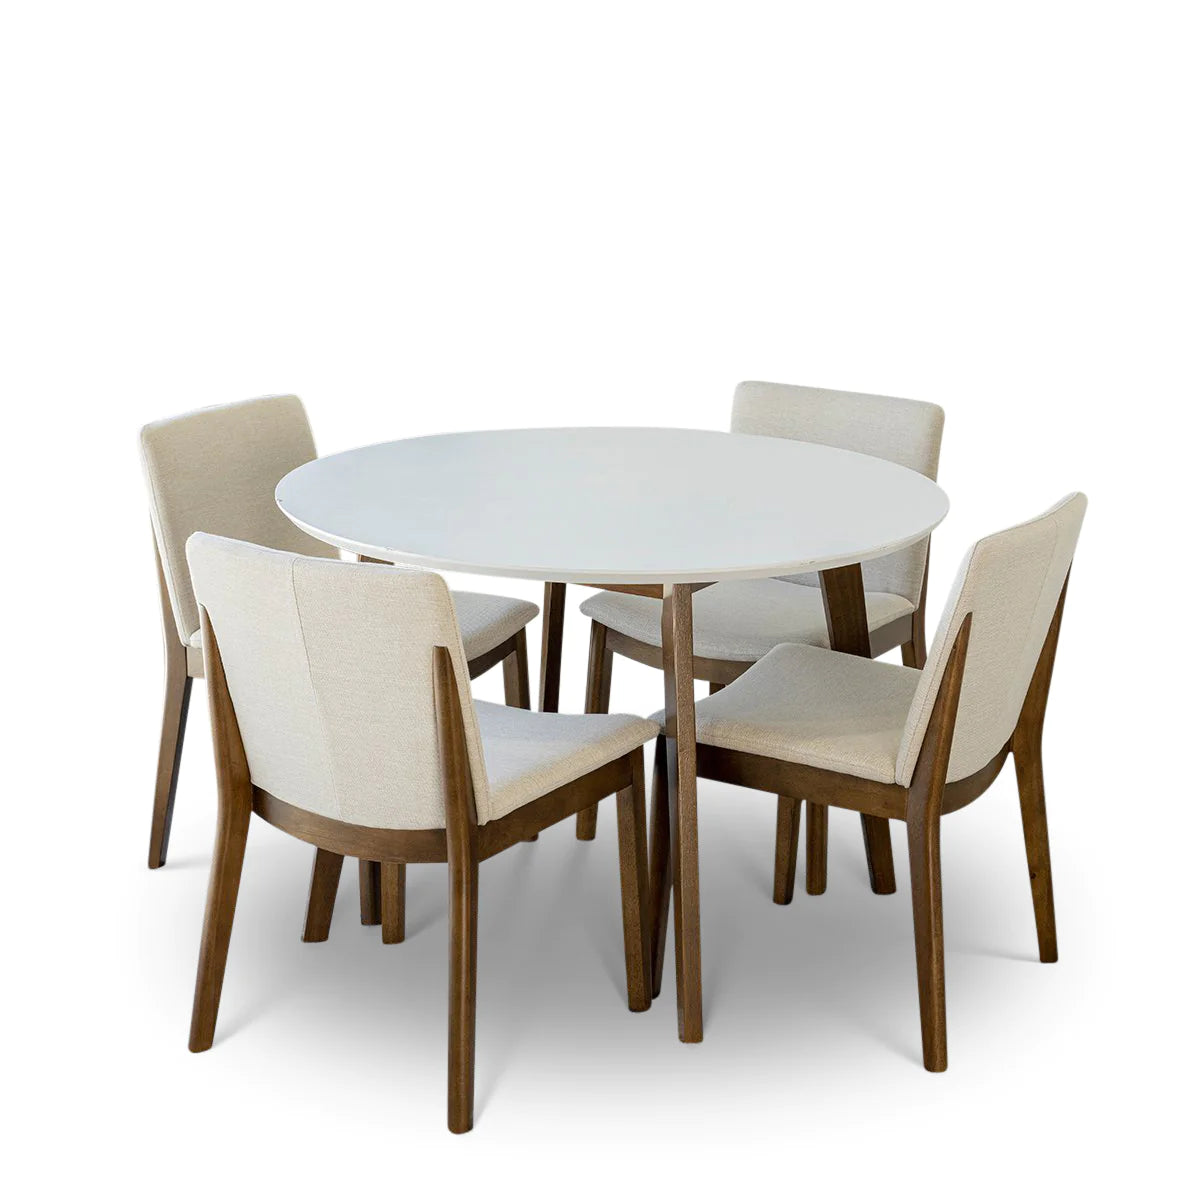 Aliana Dining set with 4 Virginia Beige Chairs (White)